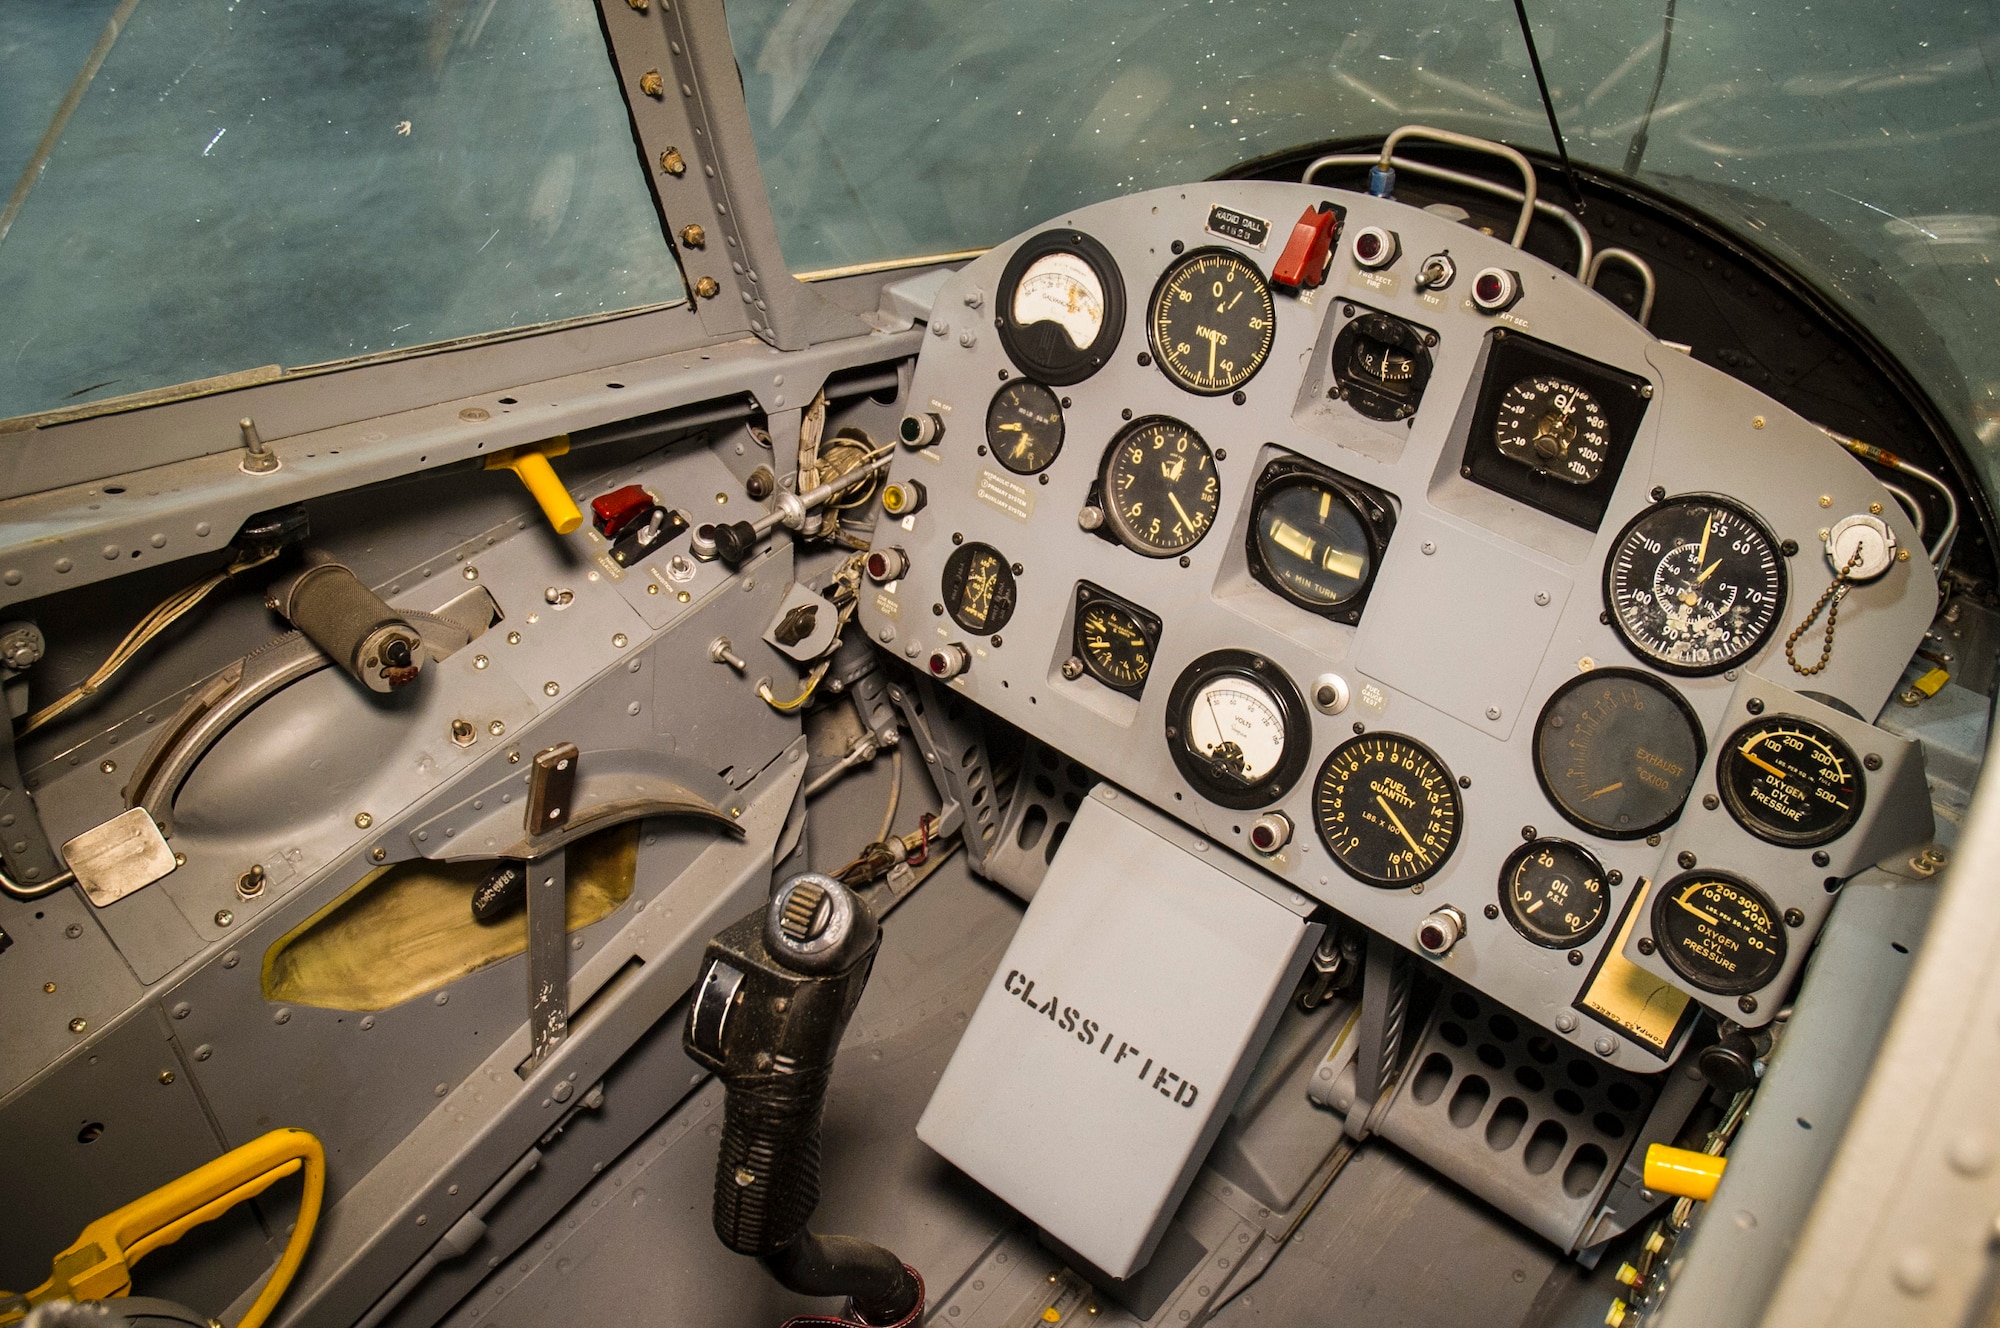 DAYTON, Ohio -- Ryan X-13 Vertijet cockpit in the Research & Development Gallery at the National Museum of the U.S. Air Force. (U.S. Air Force photo by Ken LaRock)